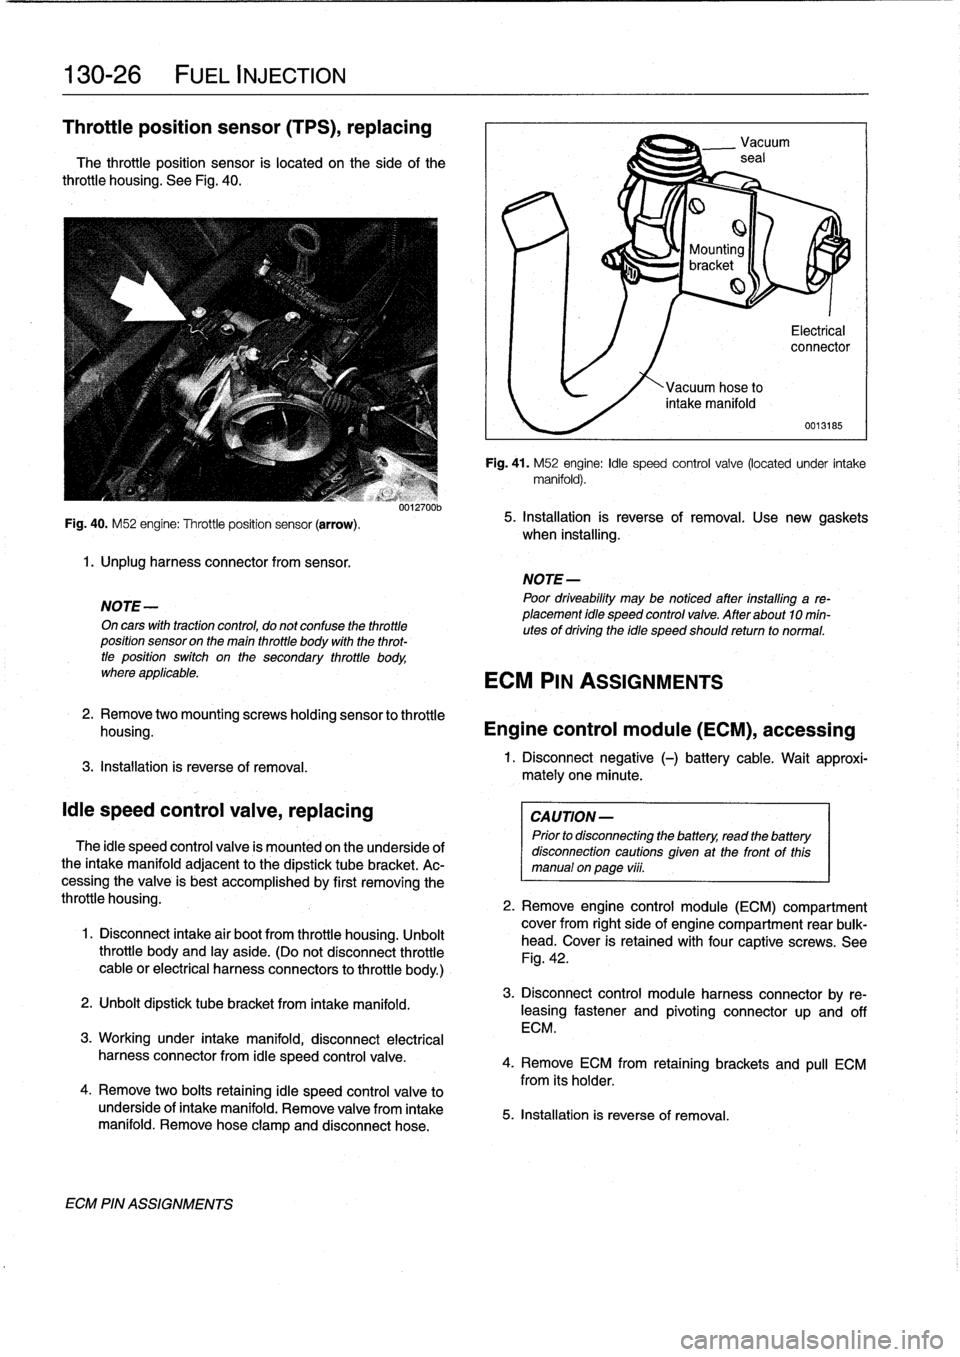 BMW 325i 1993 E36 Workshop Manual 
130-26

	

FUEL
INJECTION

Throttle
position
sensor
(TPS),
replacing

The
throttie
position
sensor
is
located
on
the
side
of
the
throttie
housing
.
See
Fig
.
40
.

Fig
.
40
.
M52
engine
:
Throttle
po